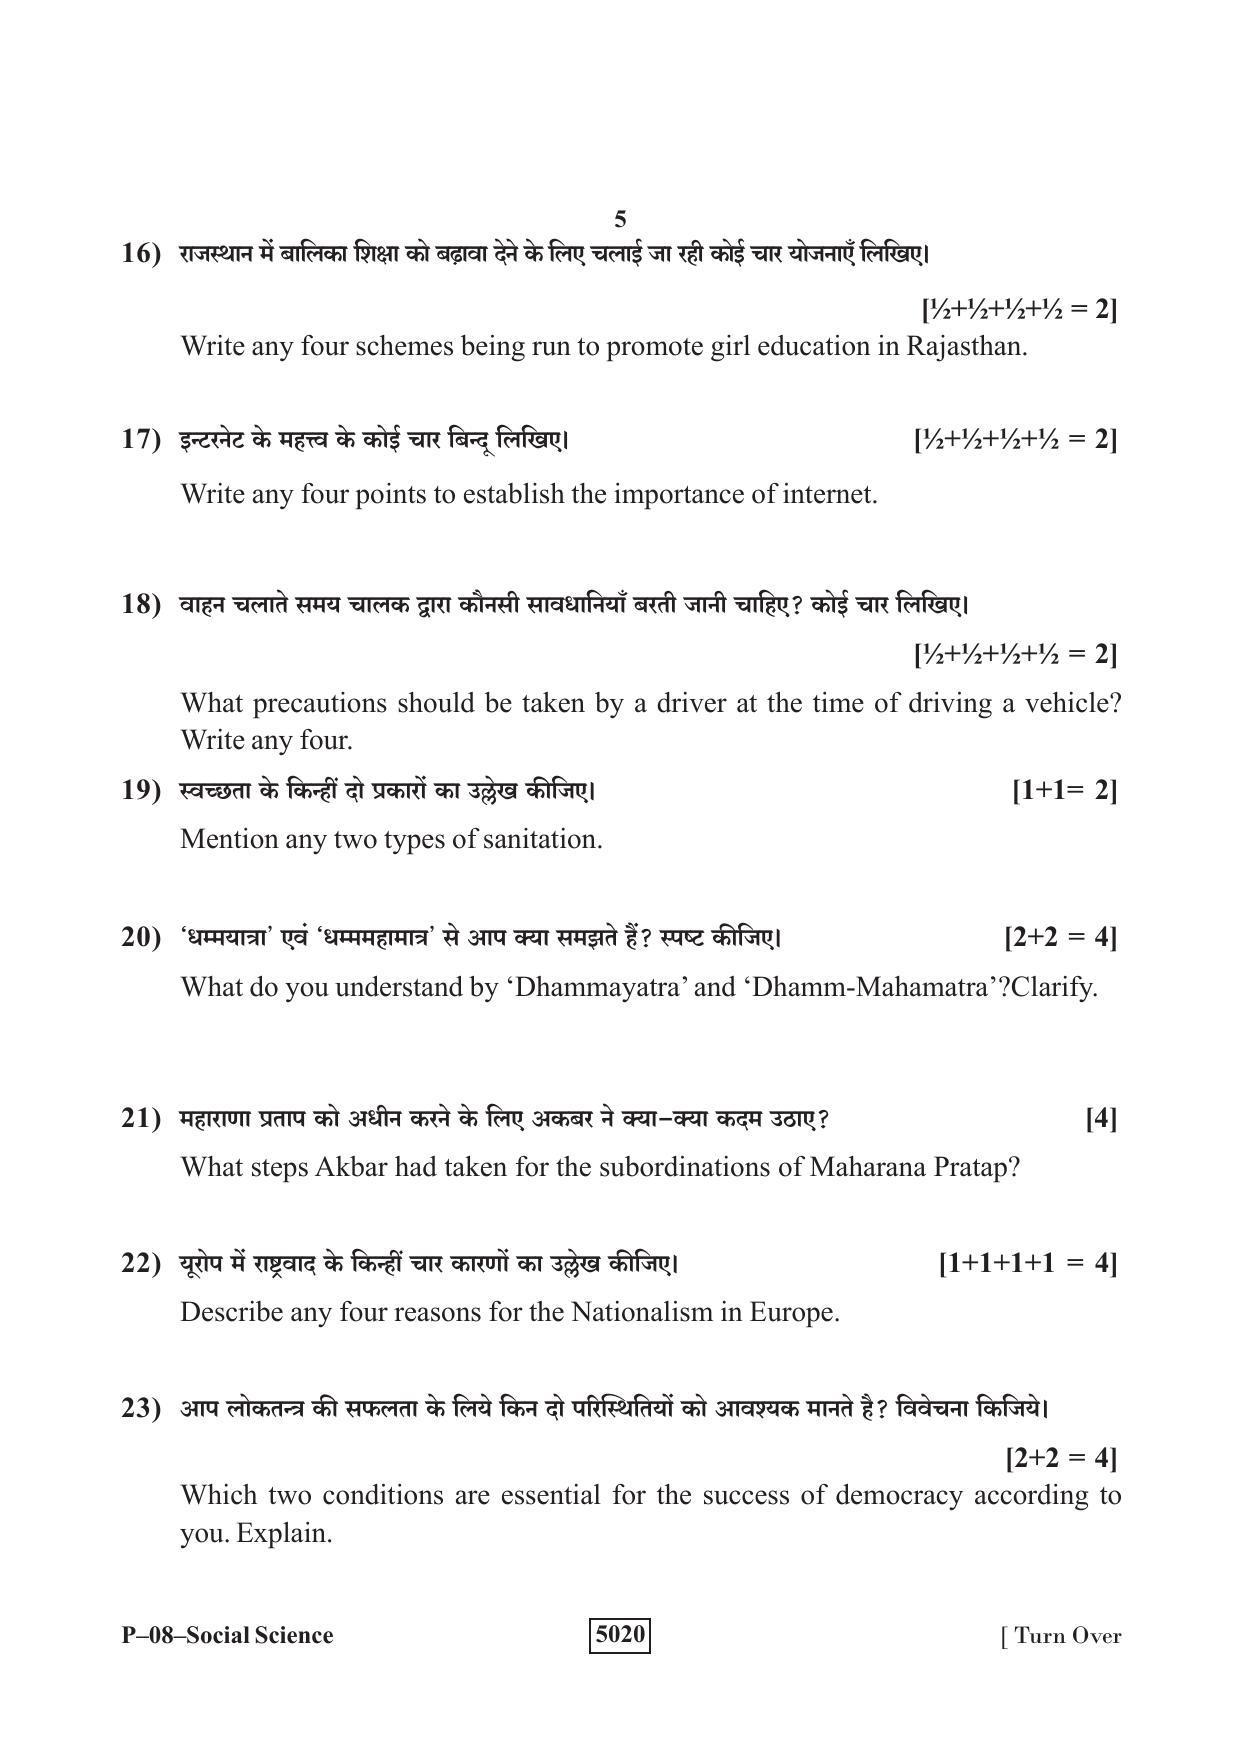 RBSE 2019 Social Science Praveshika Question Paper - Page 5